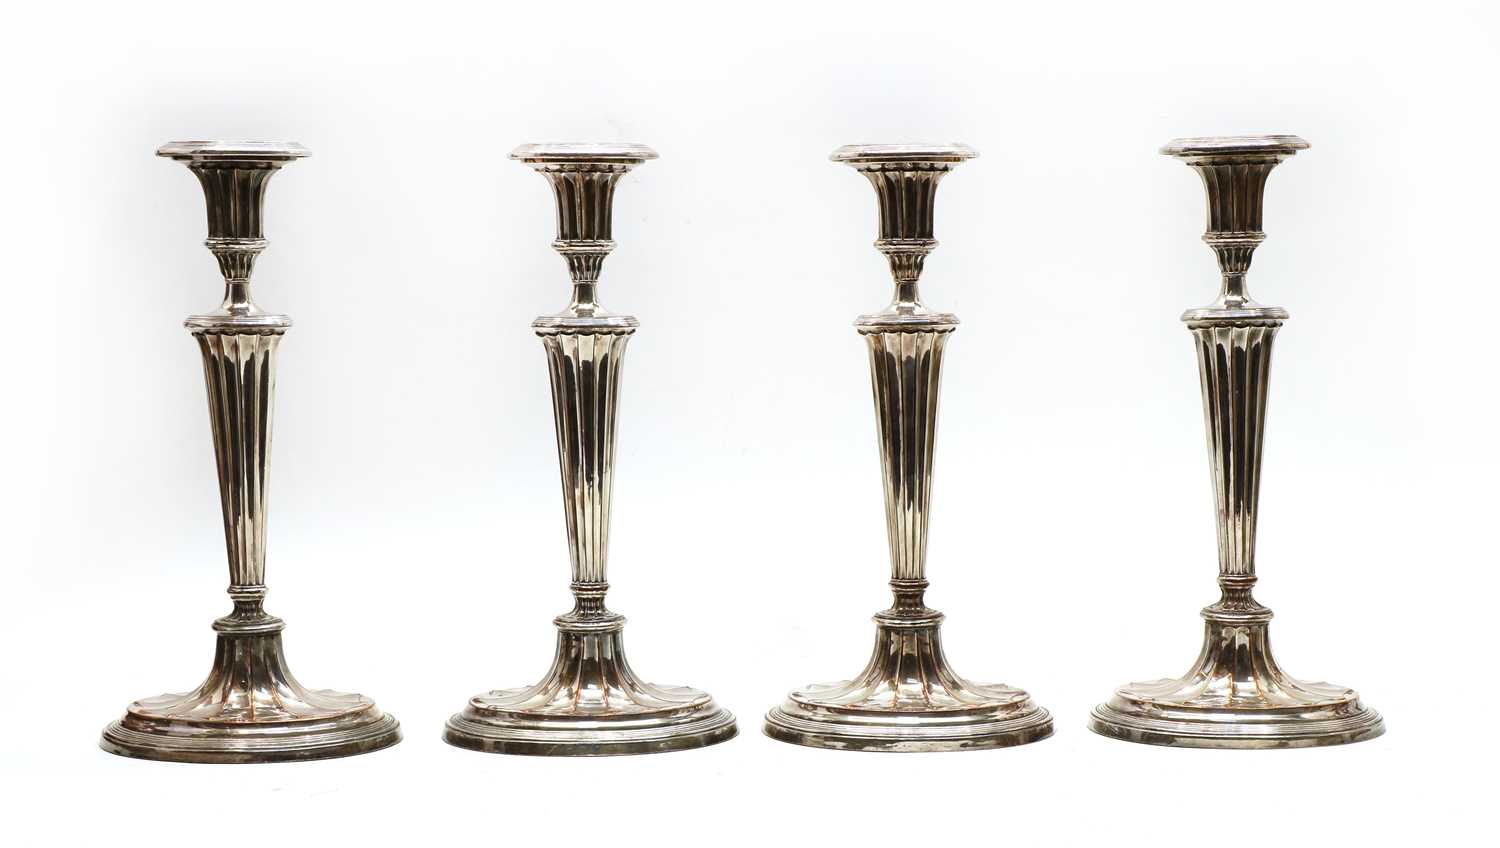 Lot 11 - A set of four George III Sheffield Plated candlesticks of Adam design